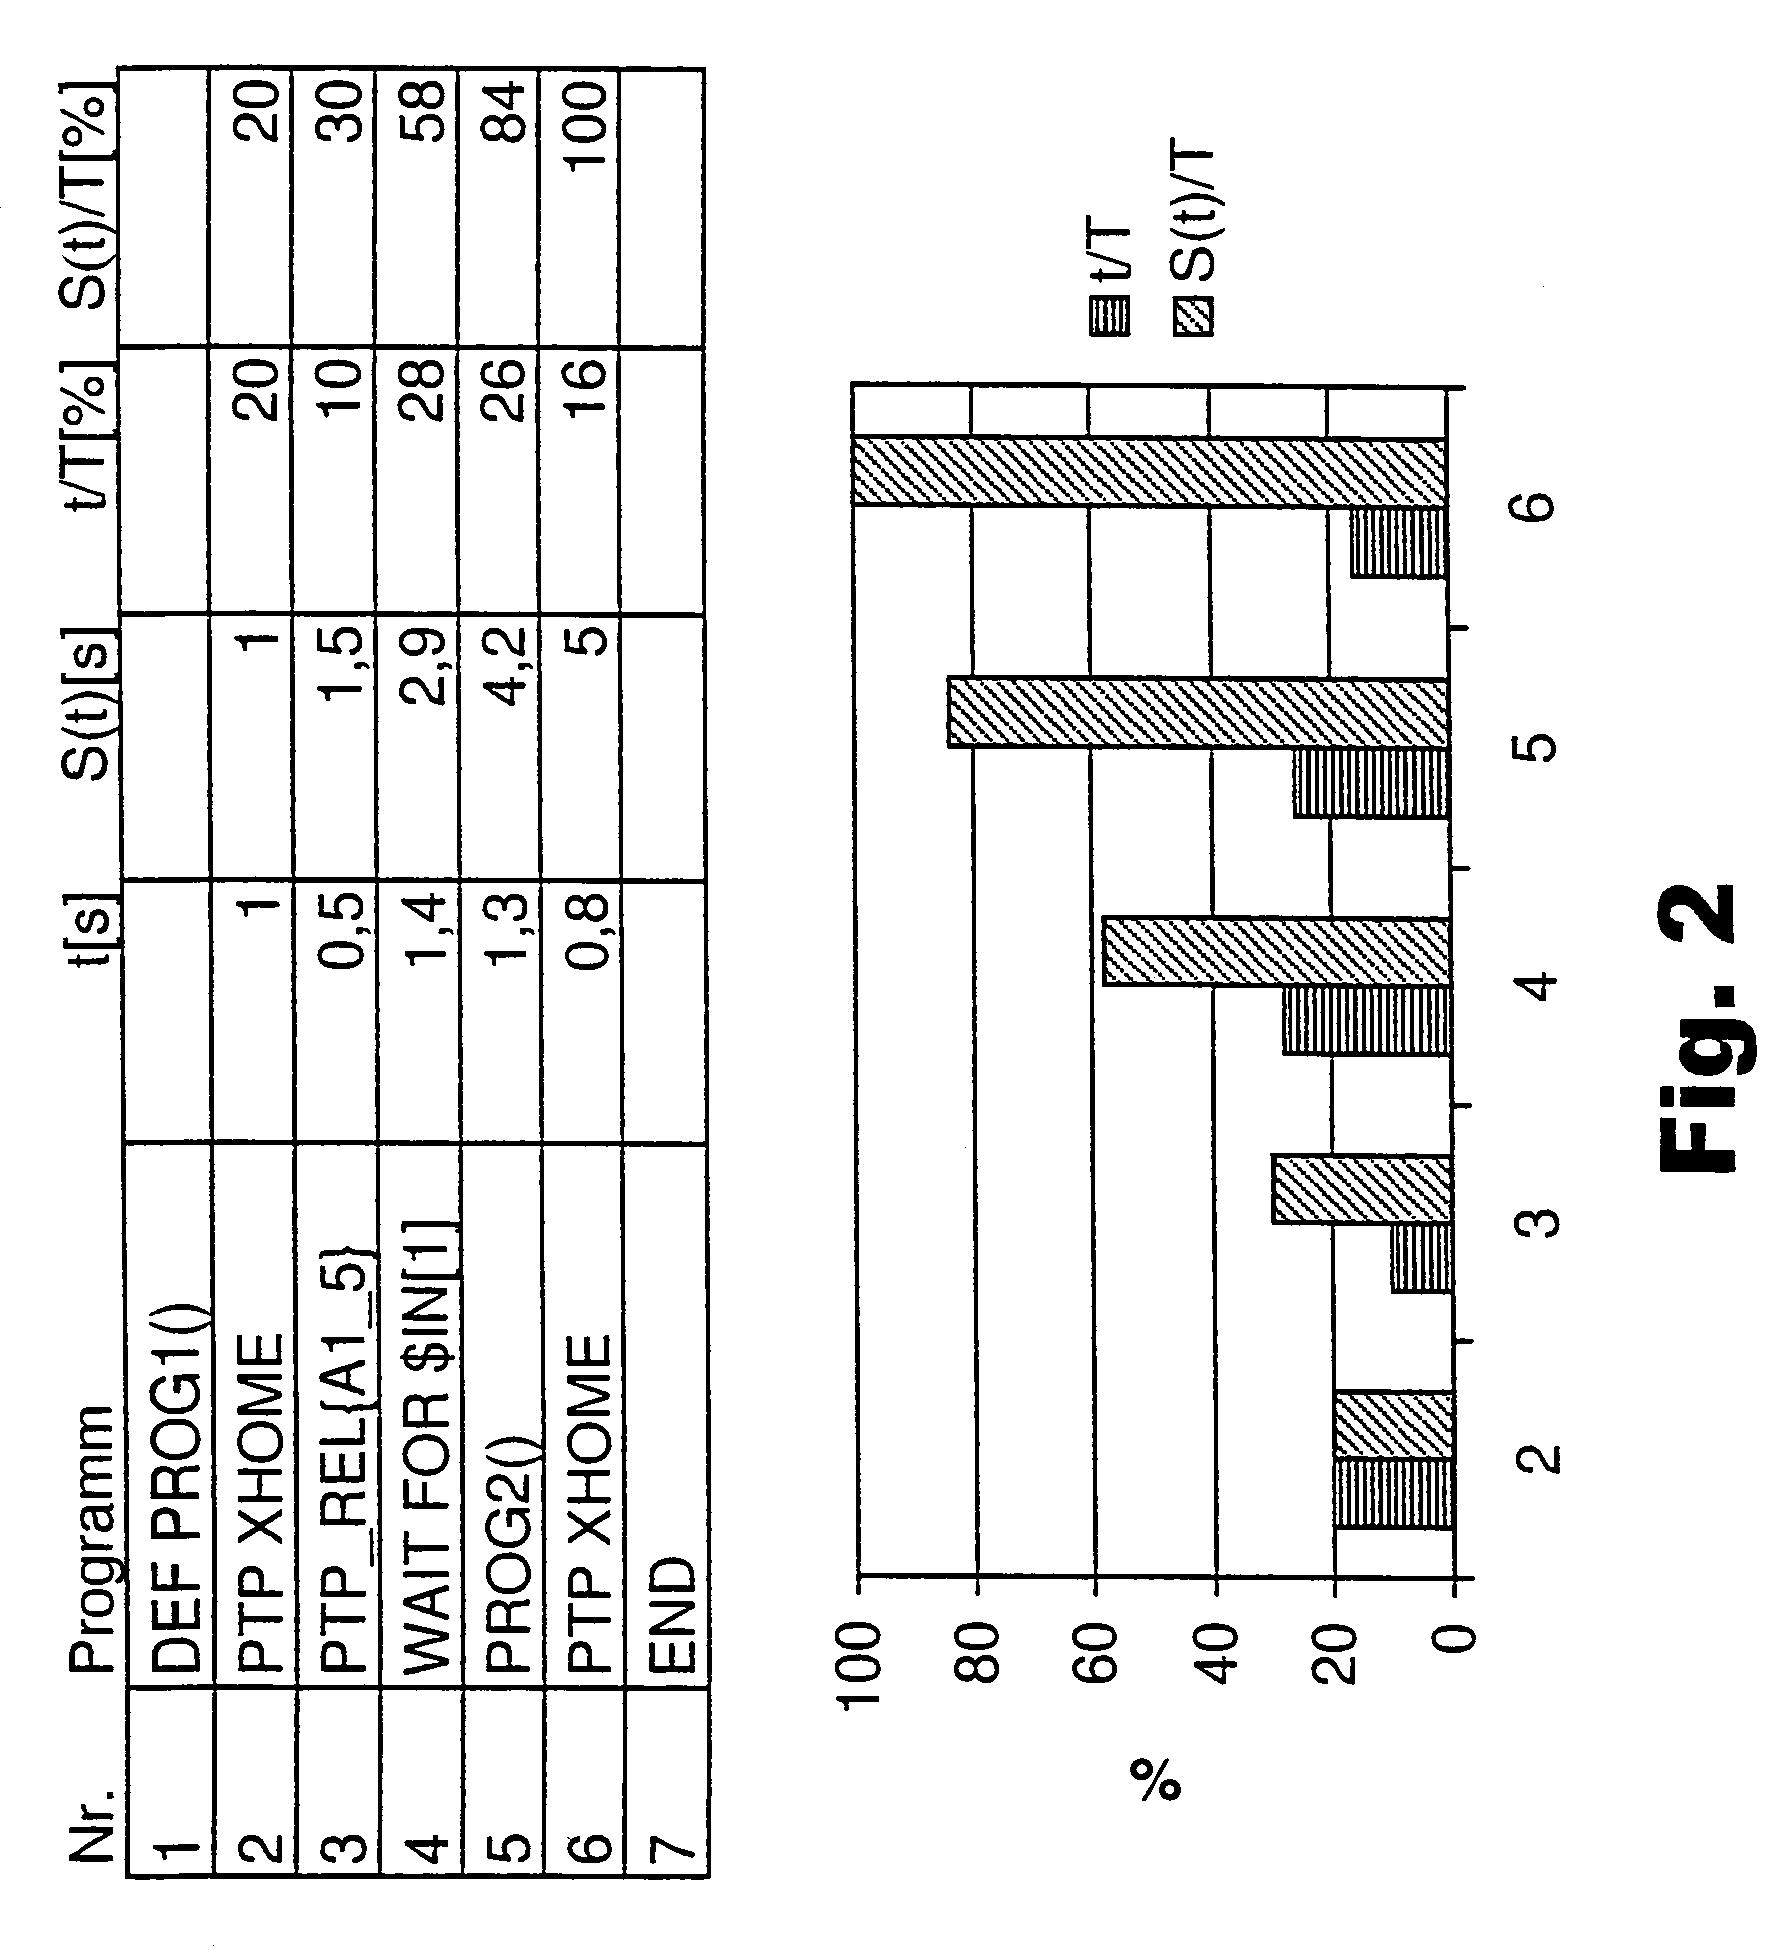 Process for determining and providing run time information for robot control programs